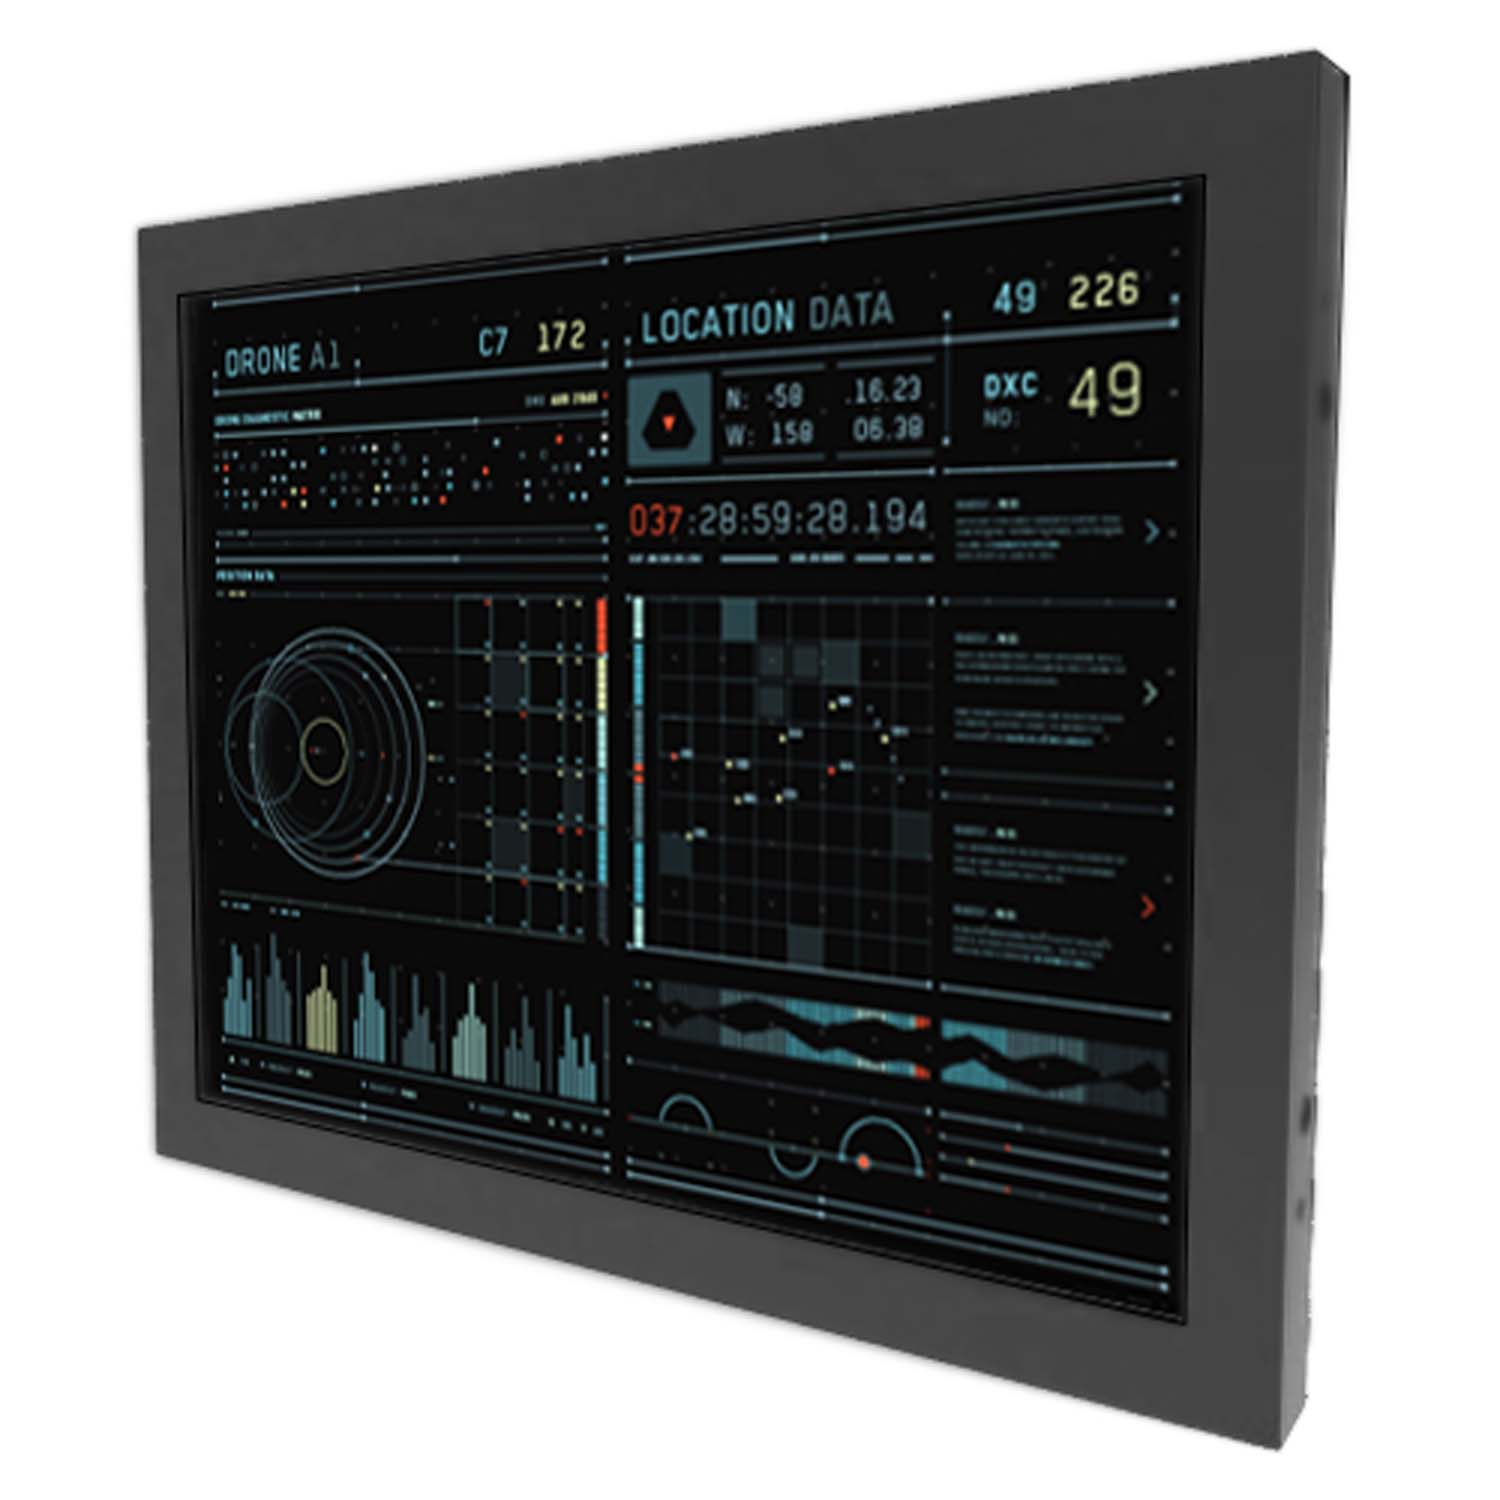 INDUSTRIAL TOUCH MONITOR KEETOUCH 15’’ OPEN FRAME KOT-0150U-RE2.2P (KT-150-RP00001)